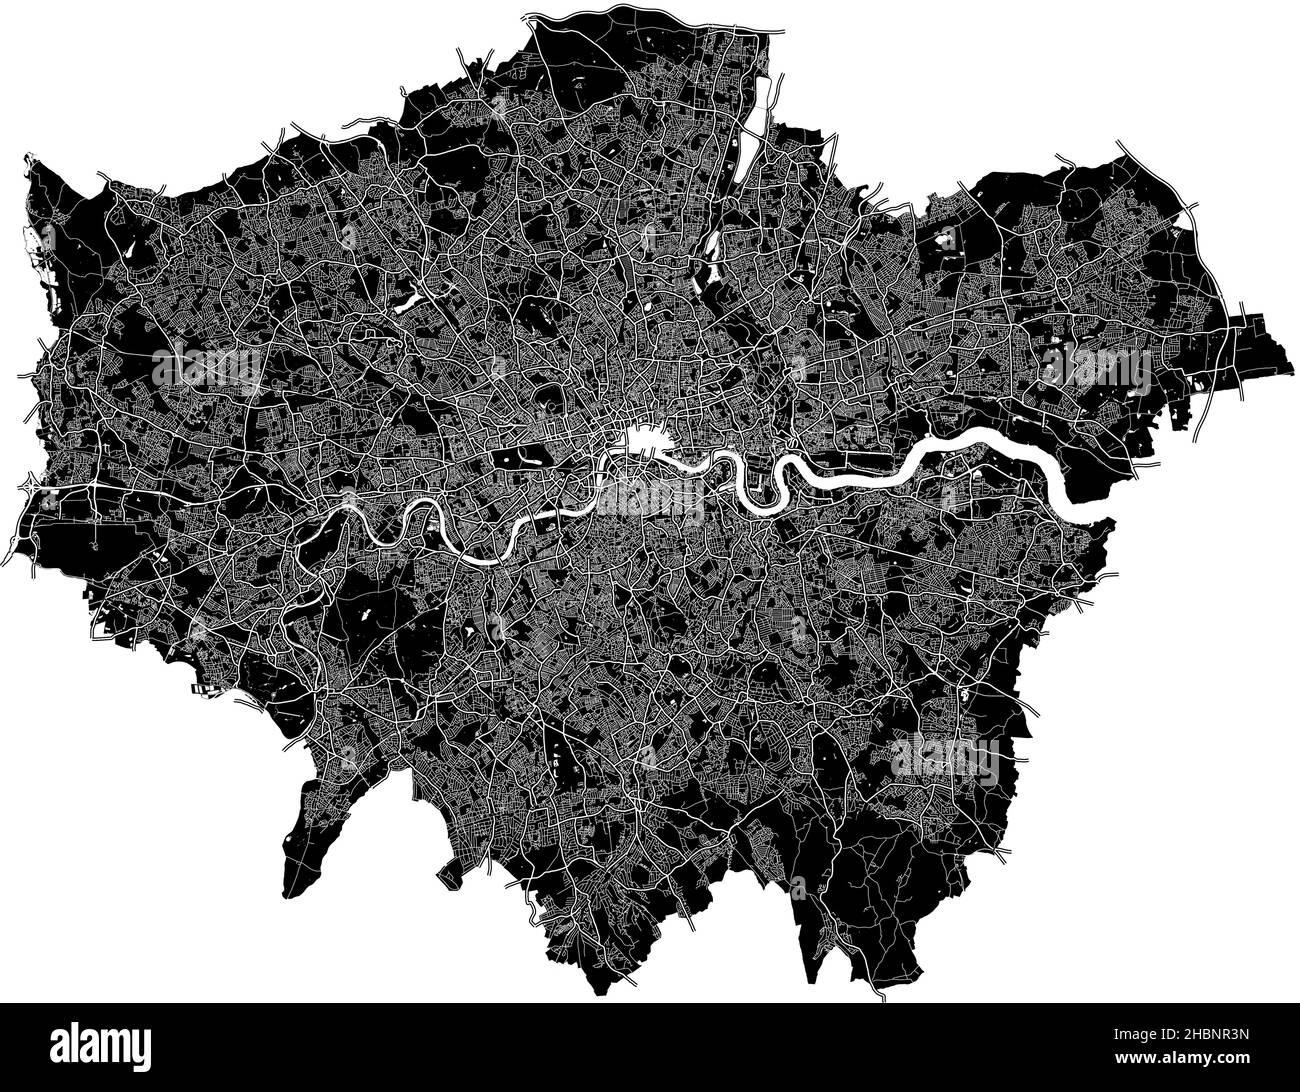 London, England, high resolution vector map with city boundaries, and editable paths. The city map was drawn with white areas and lines for main roads Stock Vector